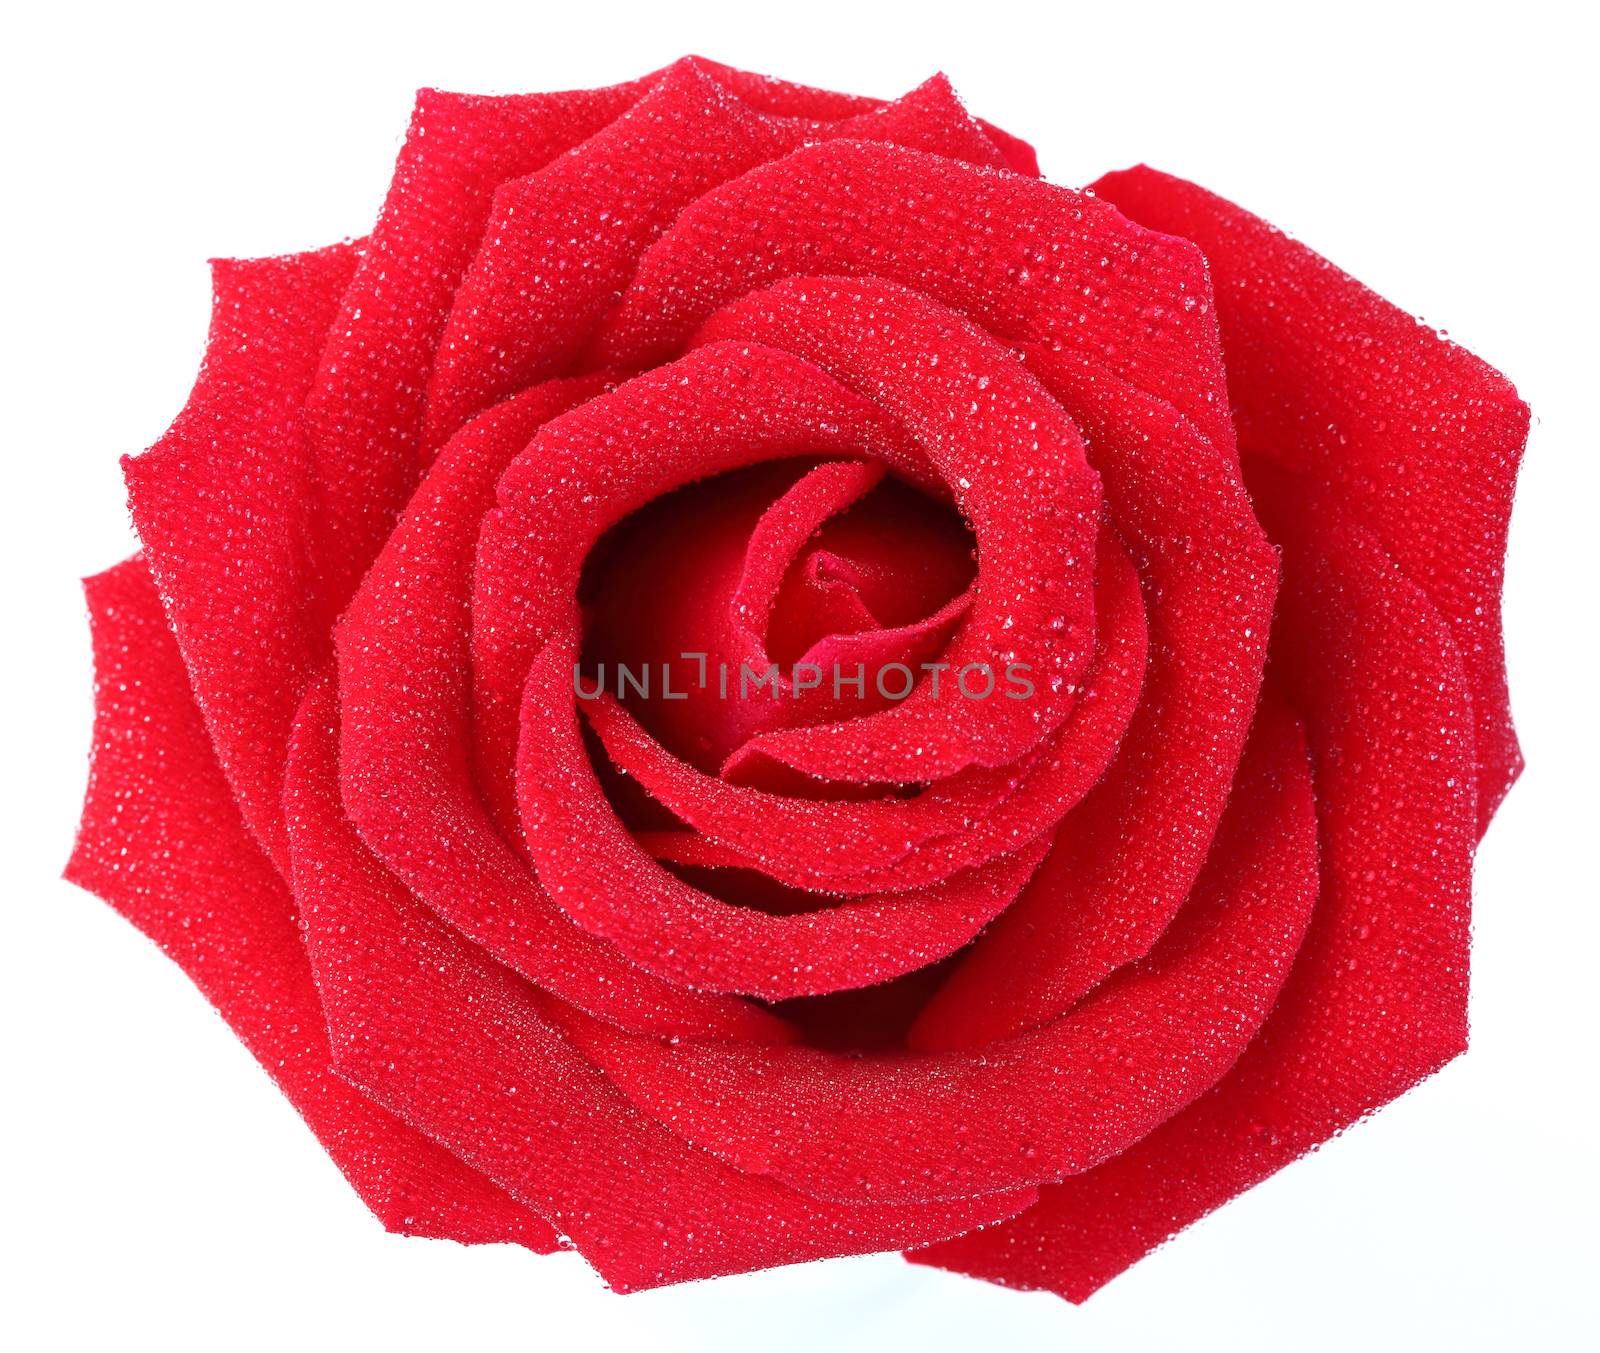 Red rose with water droplet isolated on white 